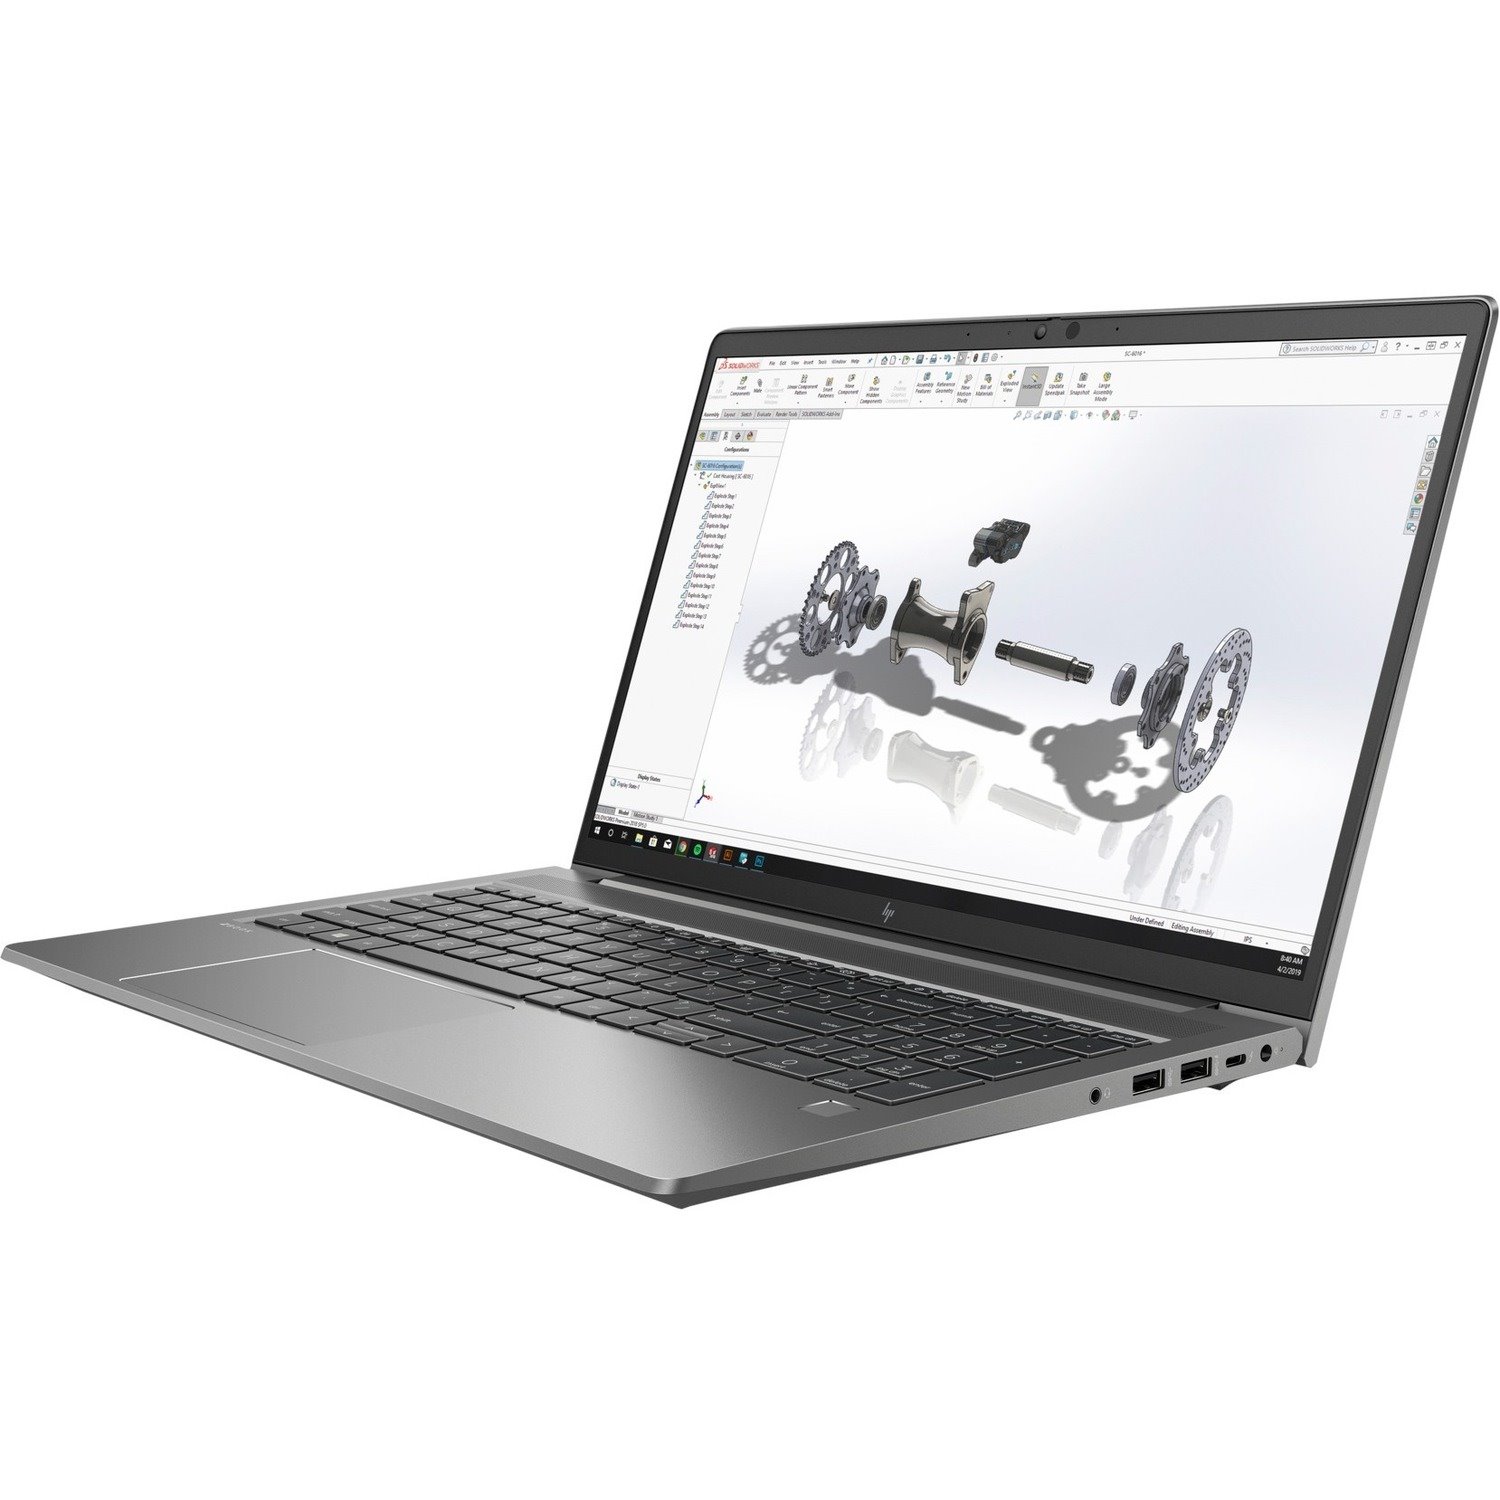 HP ZBook Power G8 39.6 cm (15.6") Rugged Mobile Workstation - 4K UHD - 3840 x 2160 - Intel Core i9 11th Gen i9-11950H Octa-core (8 Core) 2.60 GHz - 32 GB Total RAM - 1 TB SSD